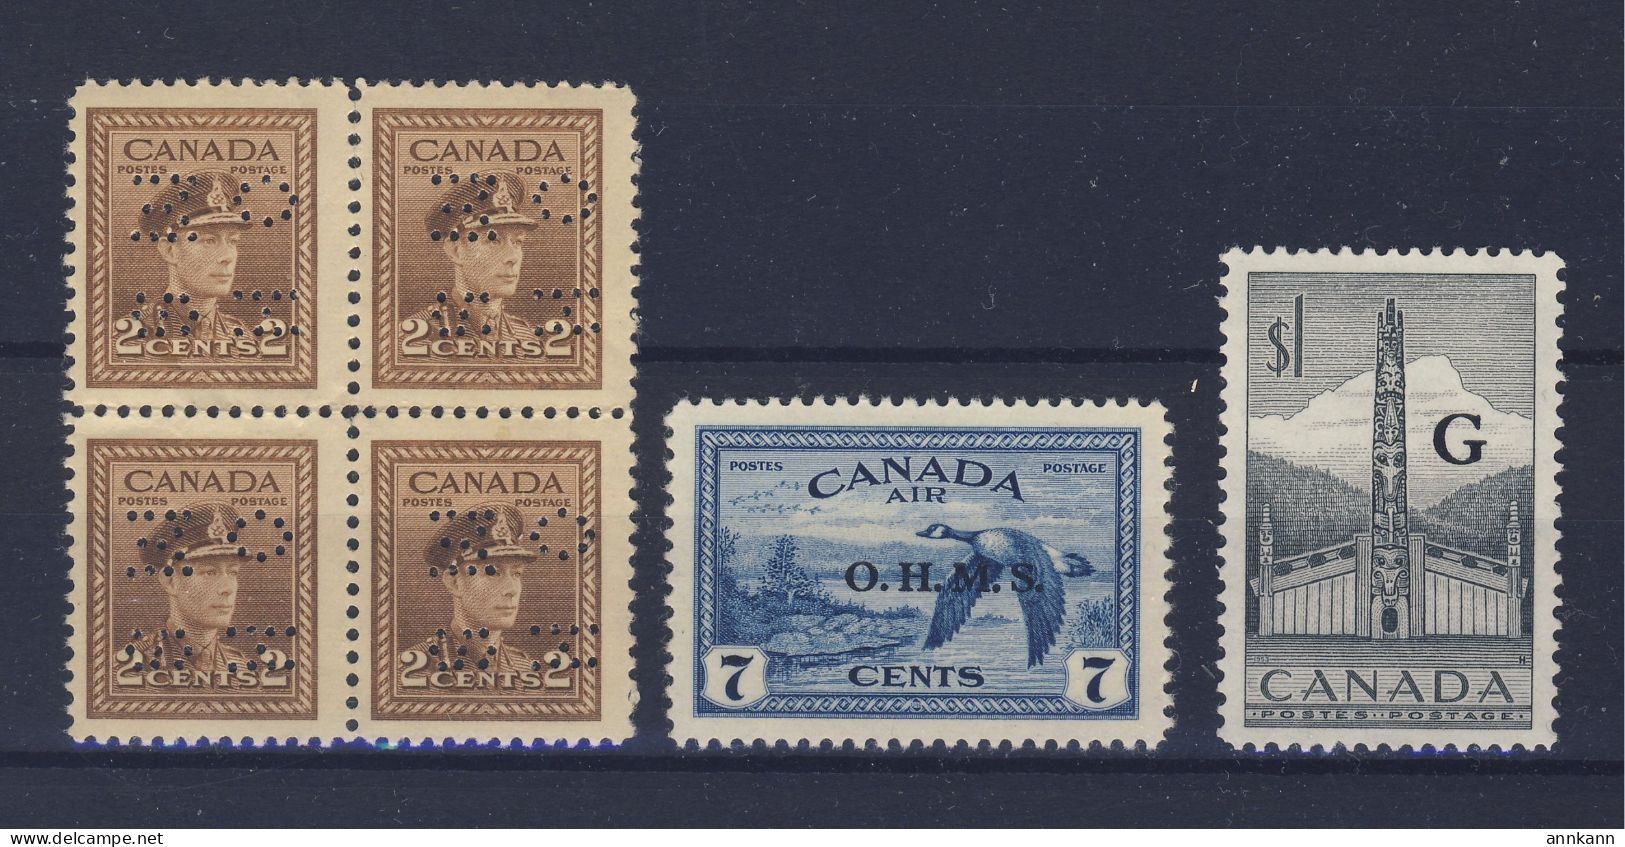 6x Canada Stamps #O250-2c Block Of 4 #CO1-7c #O32-$1.00 "G" Guide Value= $38.00 - Perfin